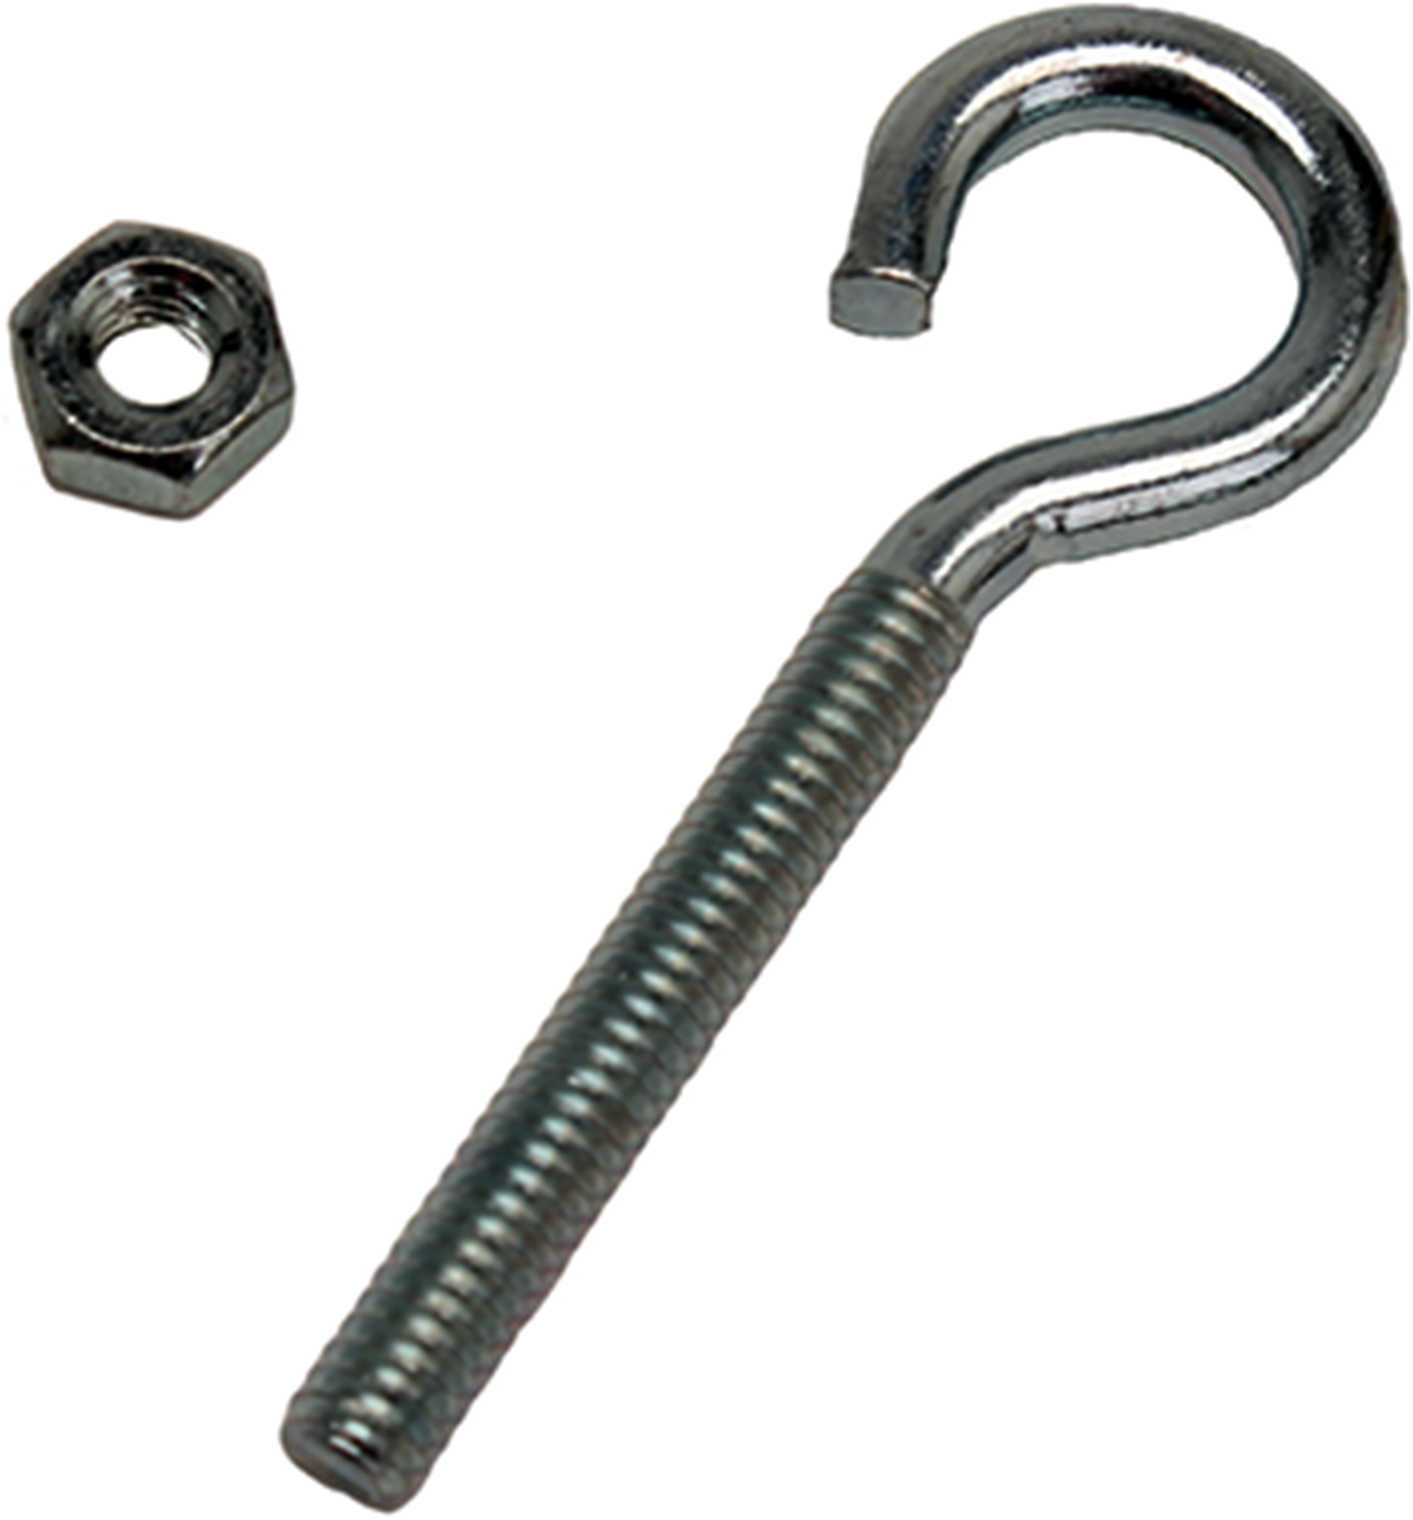 Vexilar Inc. Replacement Eye Bolt for Suspending Transducer RB-100